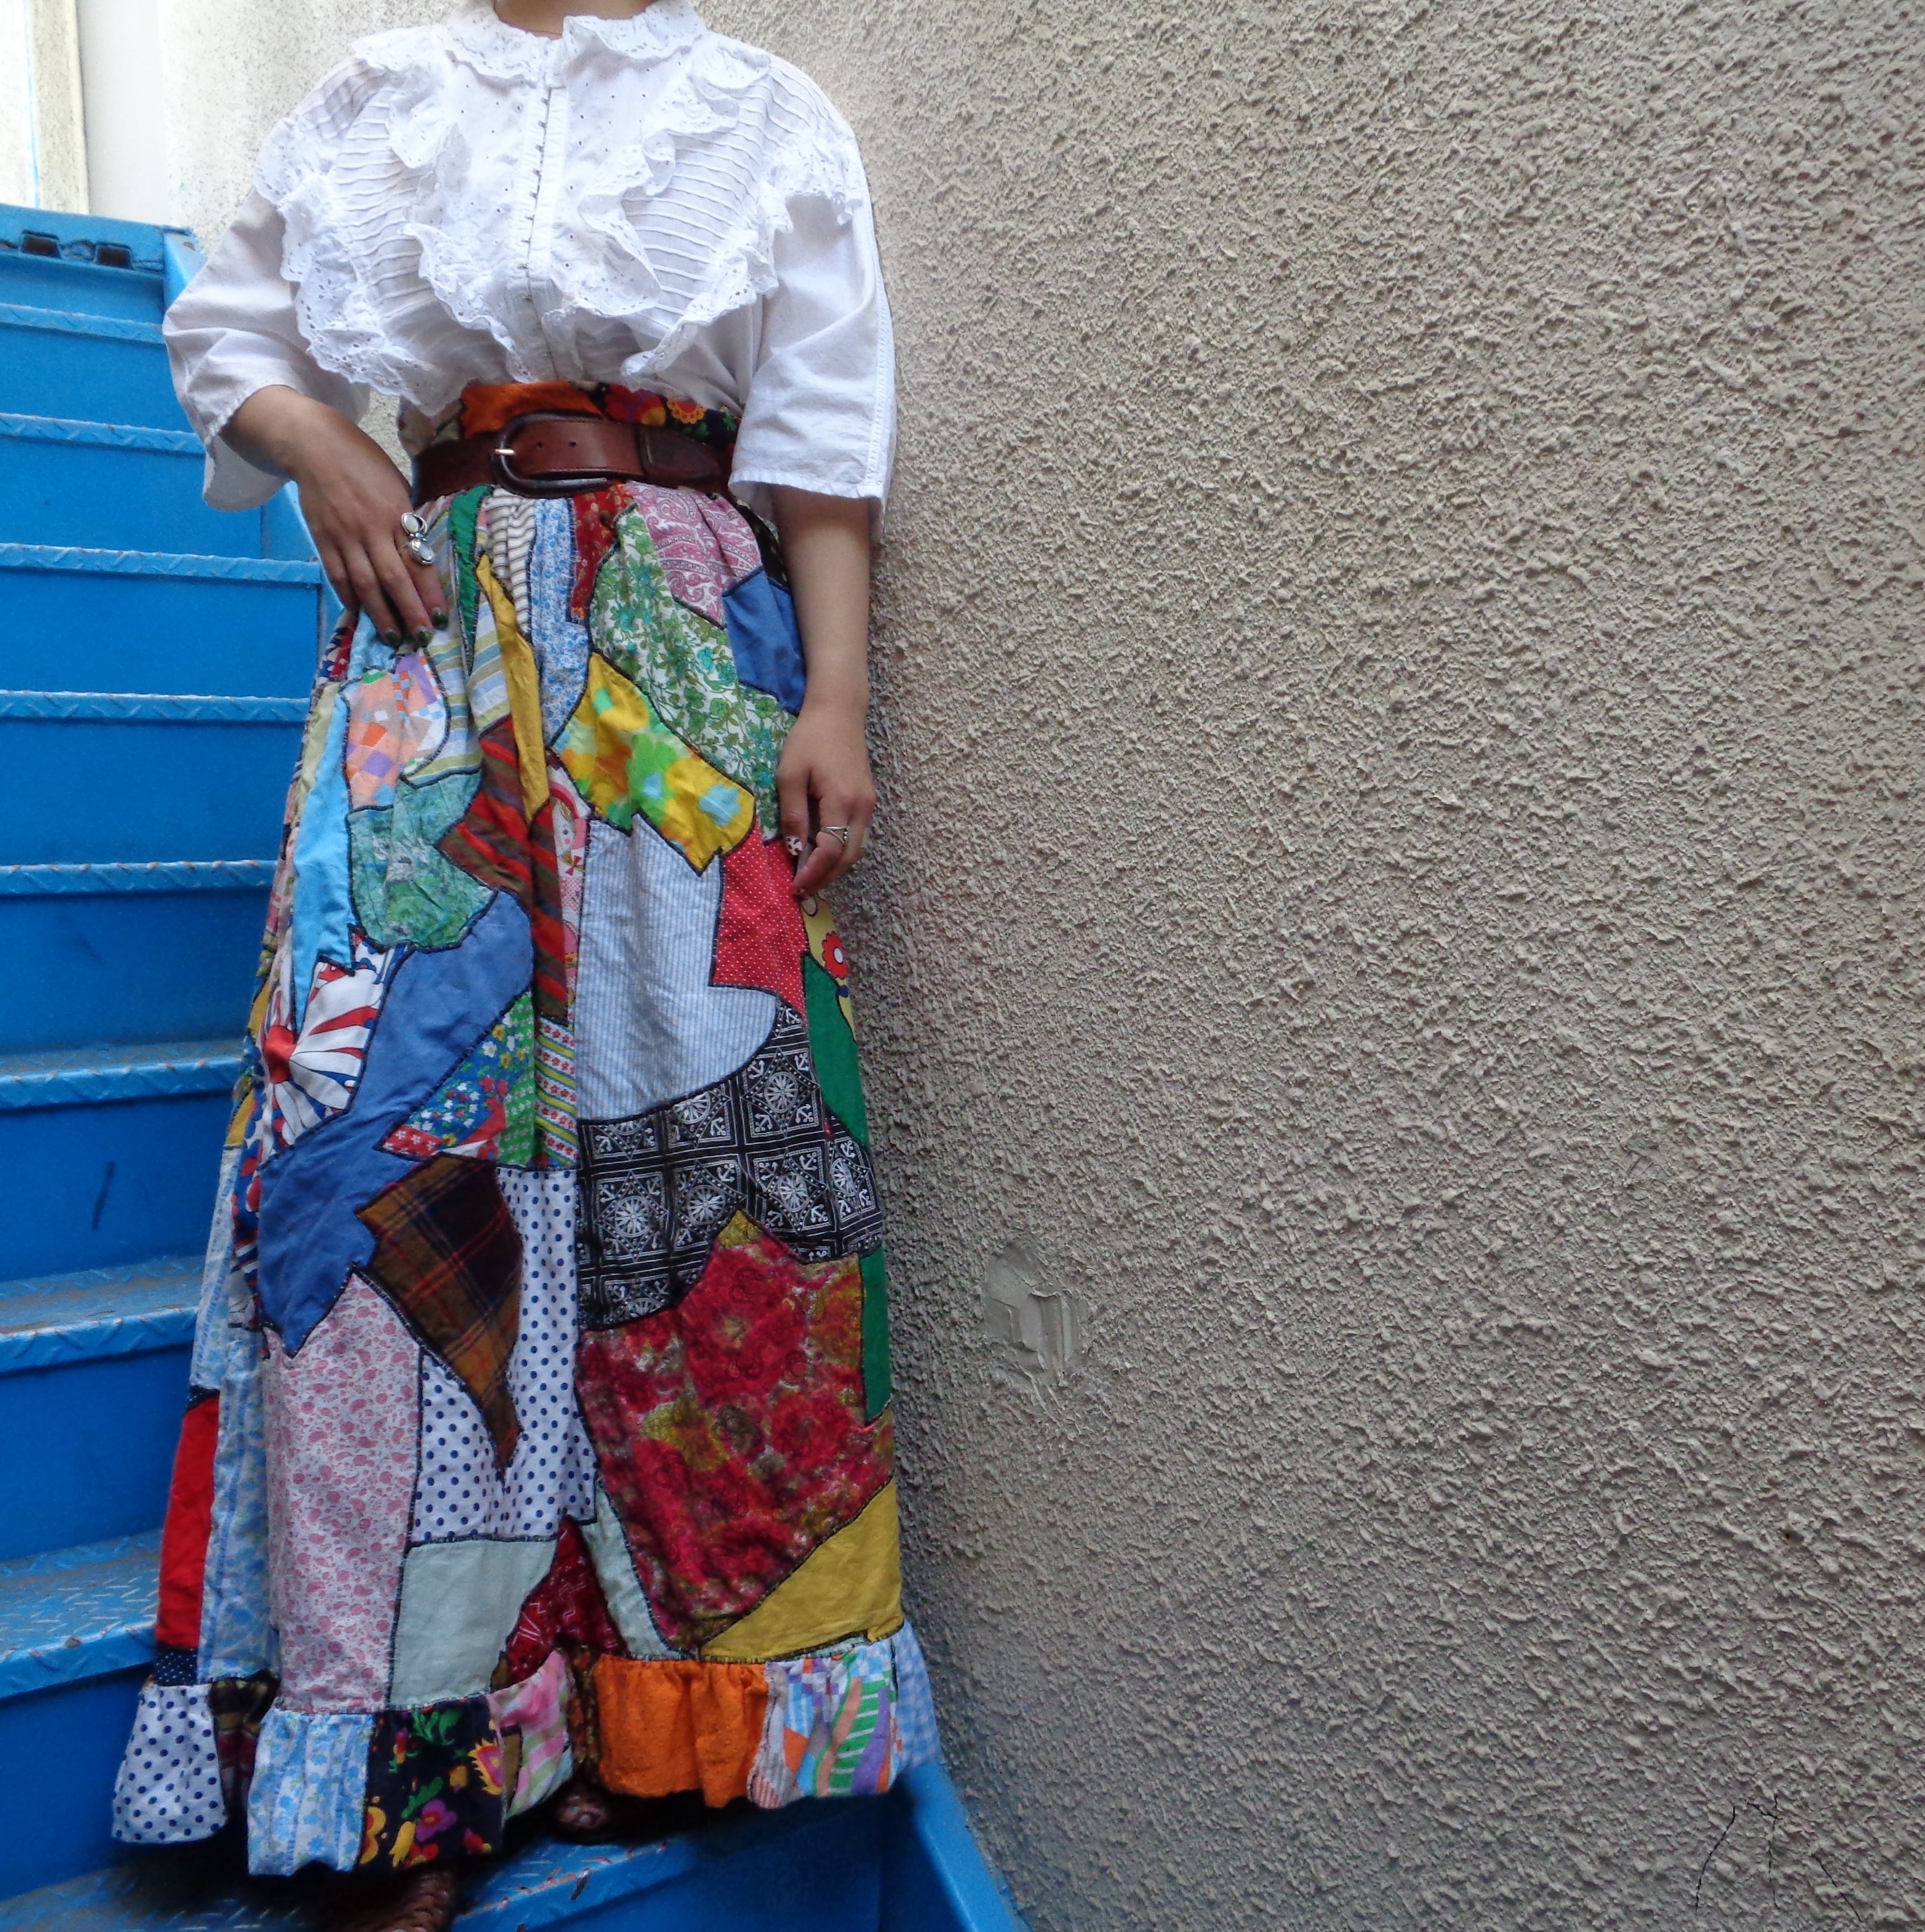 Vintage patchwork long skirt／ヴィンテージ パッチワーク ロングスカート | BIG TIME ｜ヴィンテージ 古着  BIGTIME（ビッグタイム） powered by BASE